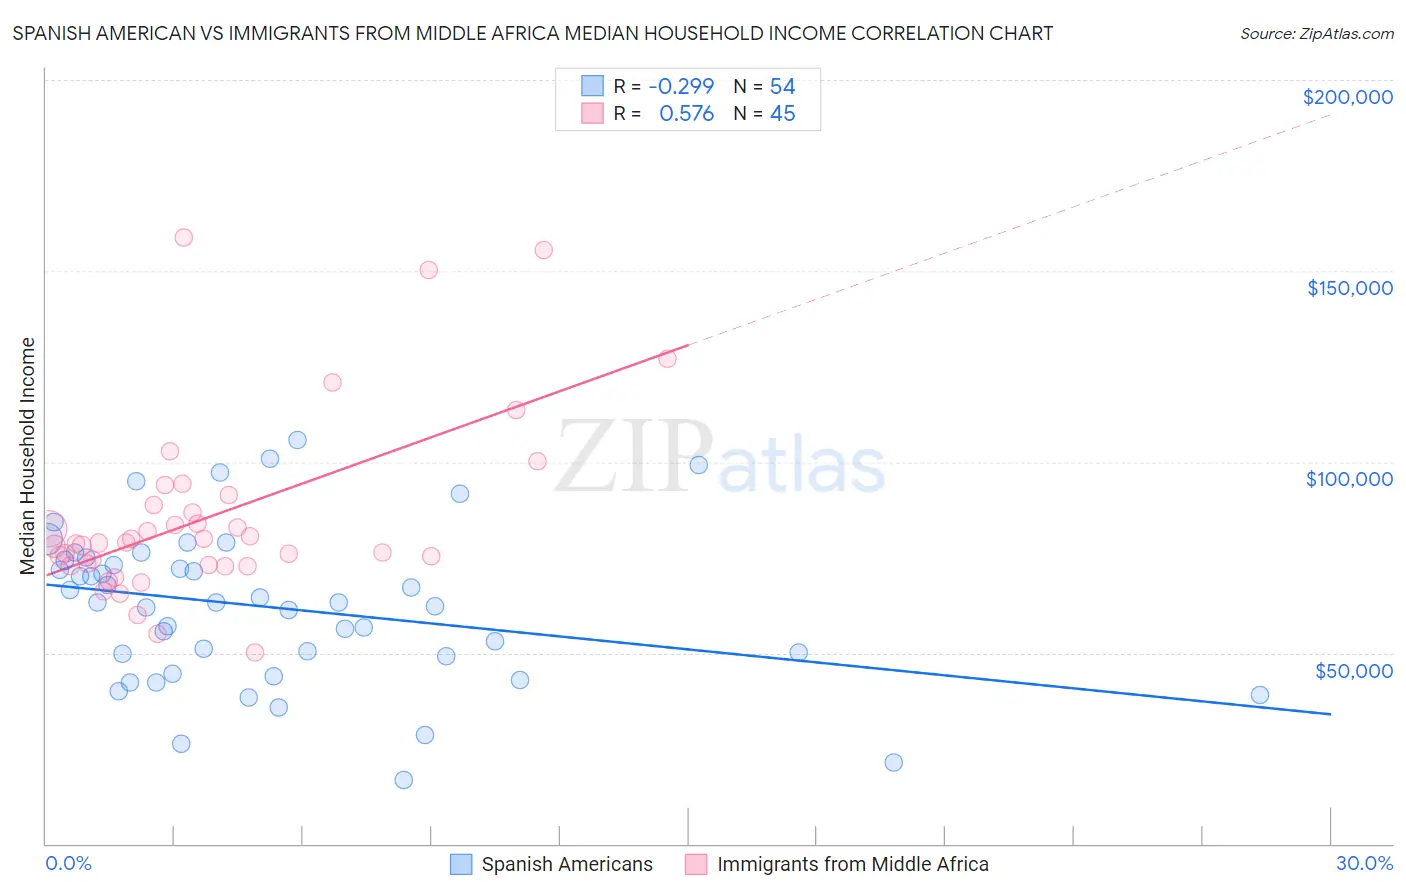 Spanish American vs Immigrants from Middle Africa Median Household Income